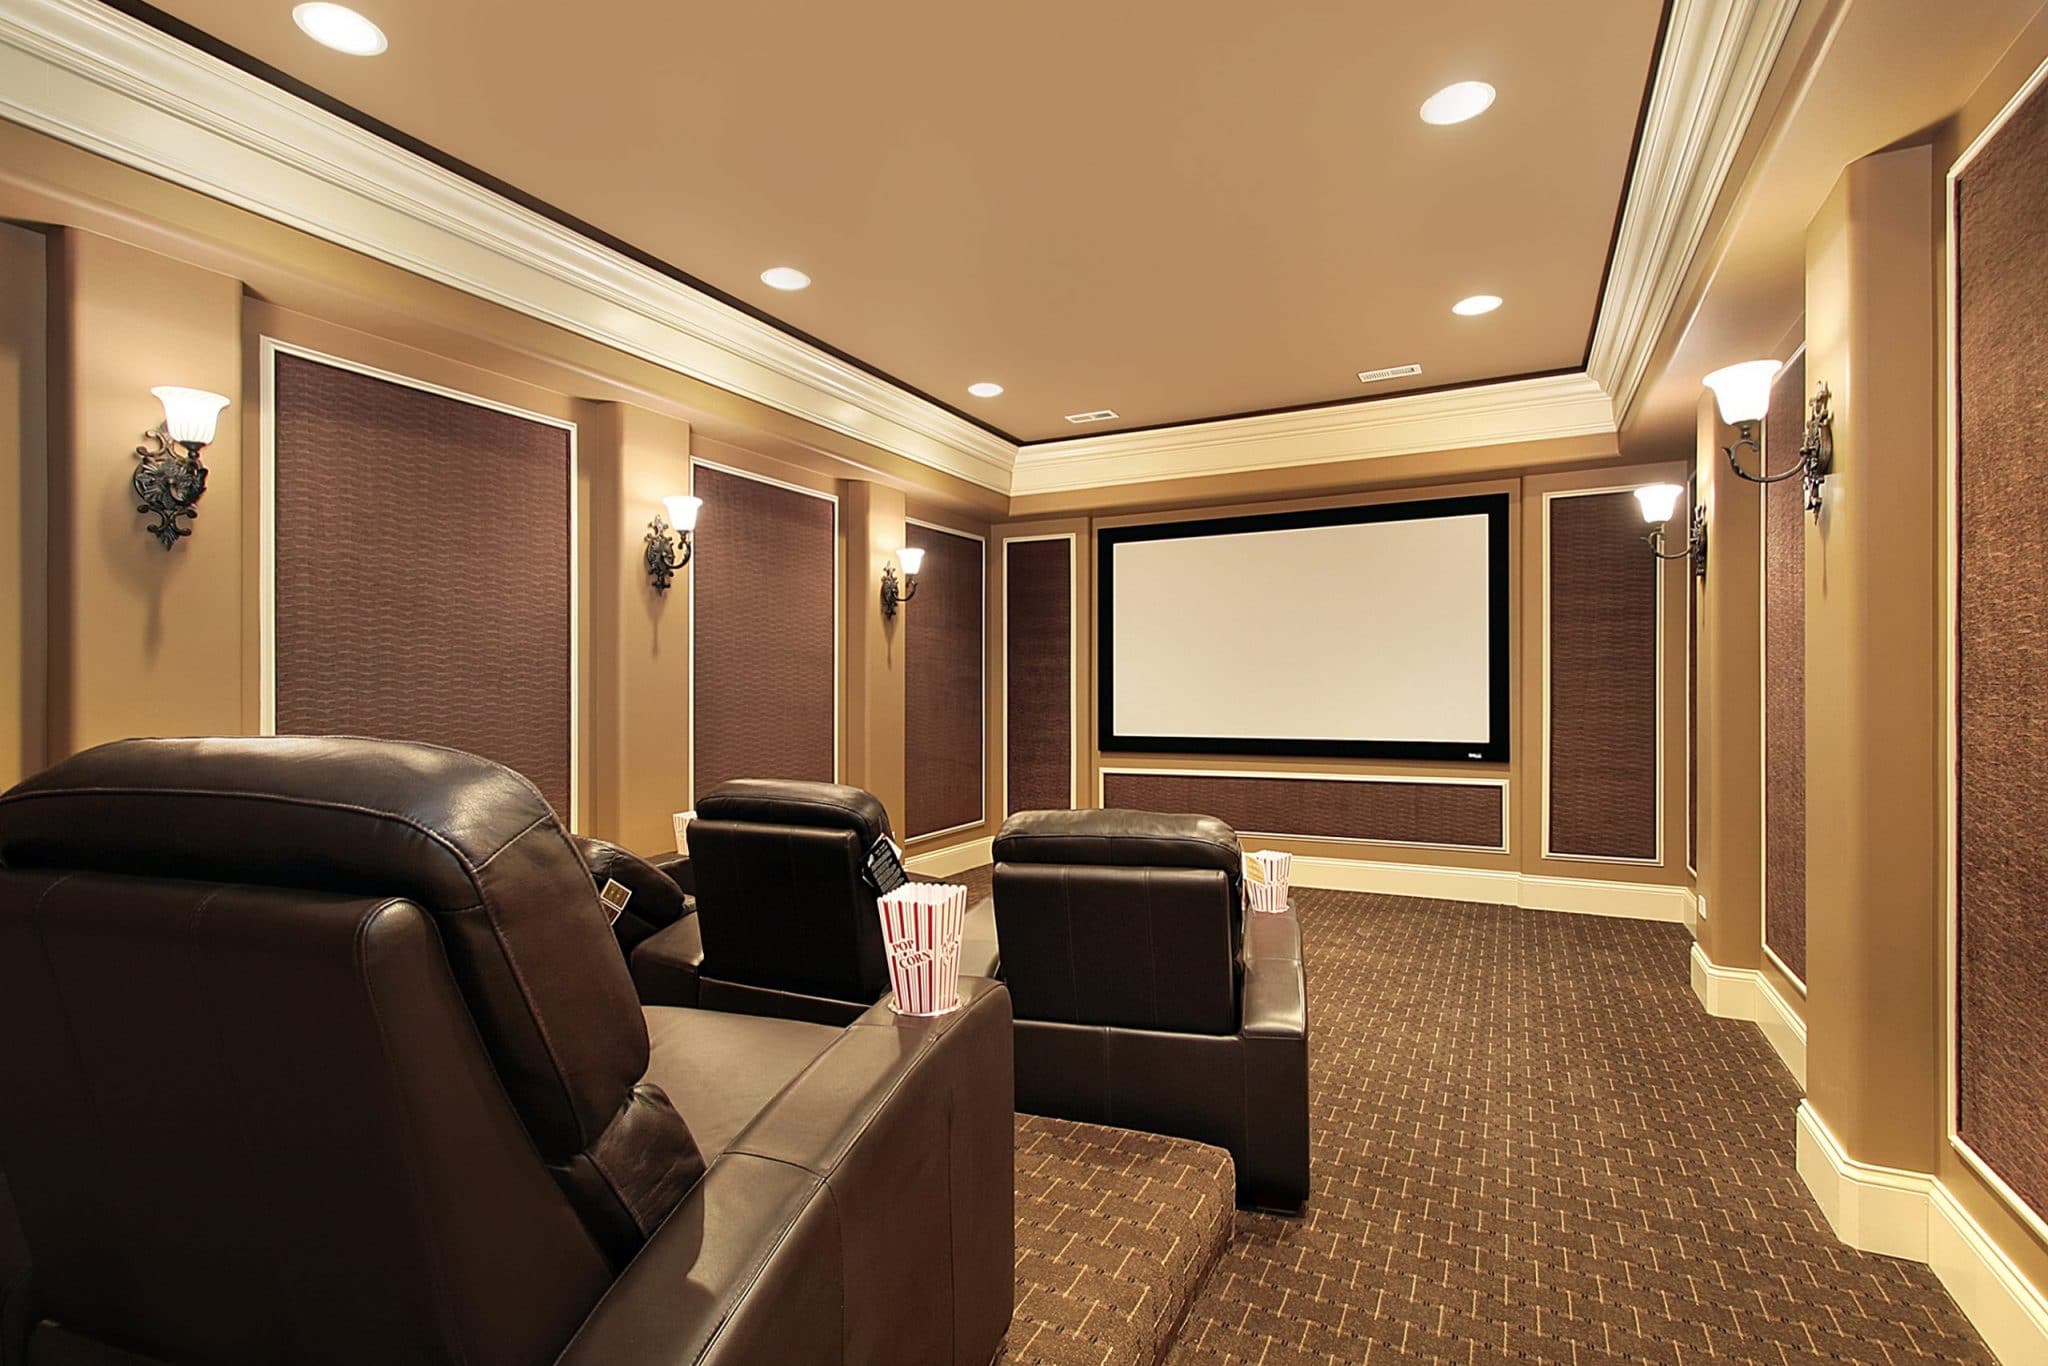 Home theater in luxury house with large TV screen